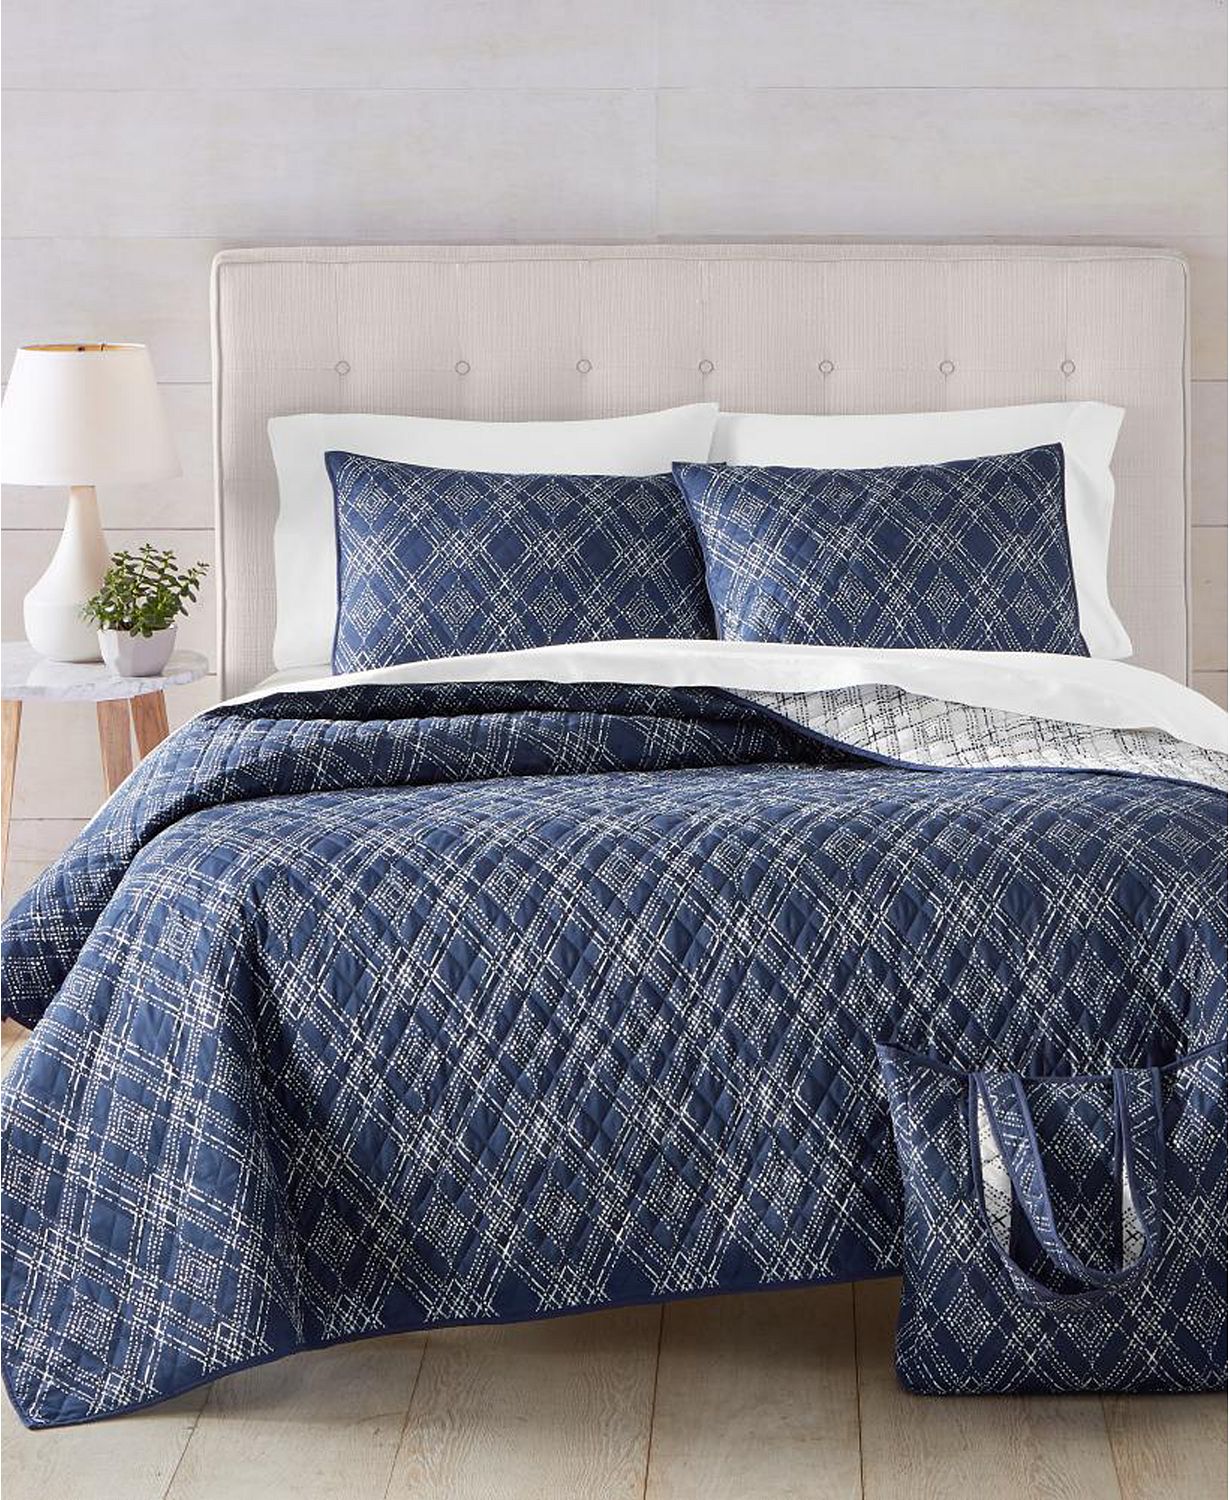 These Martha Stewart Quilt Sets Are Half Off | The Daily Caller